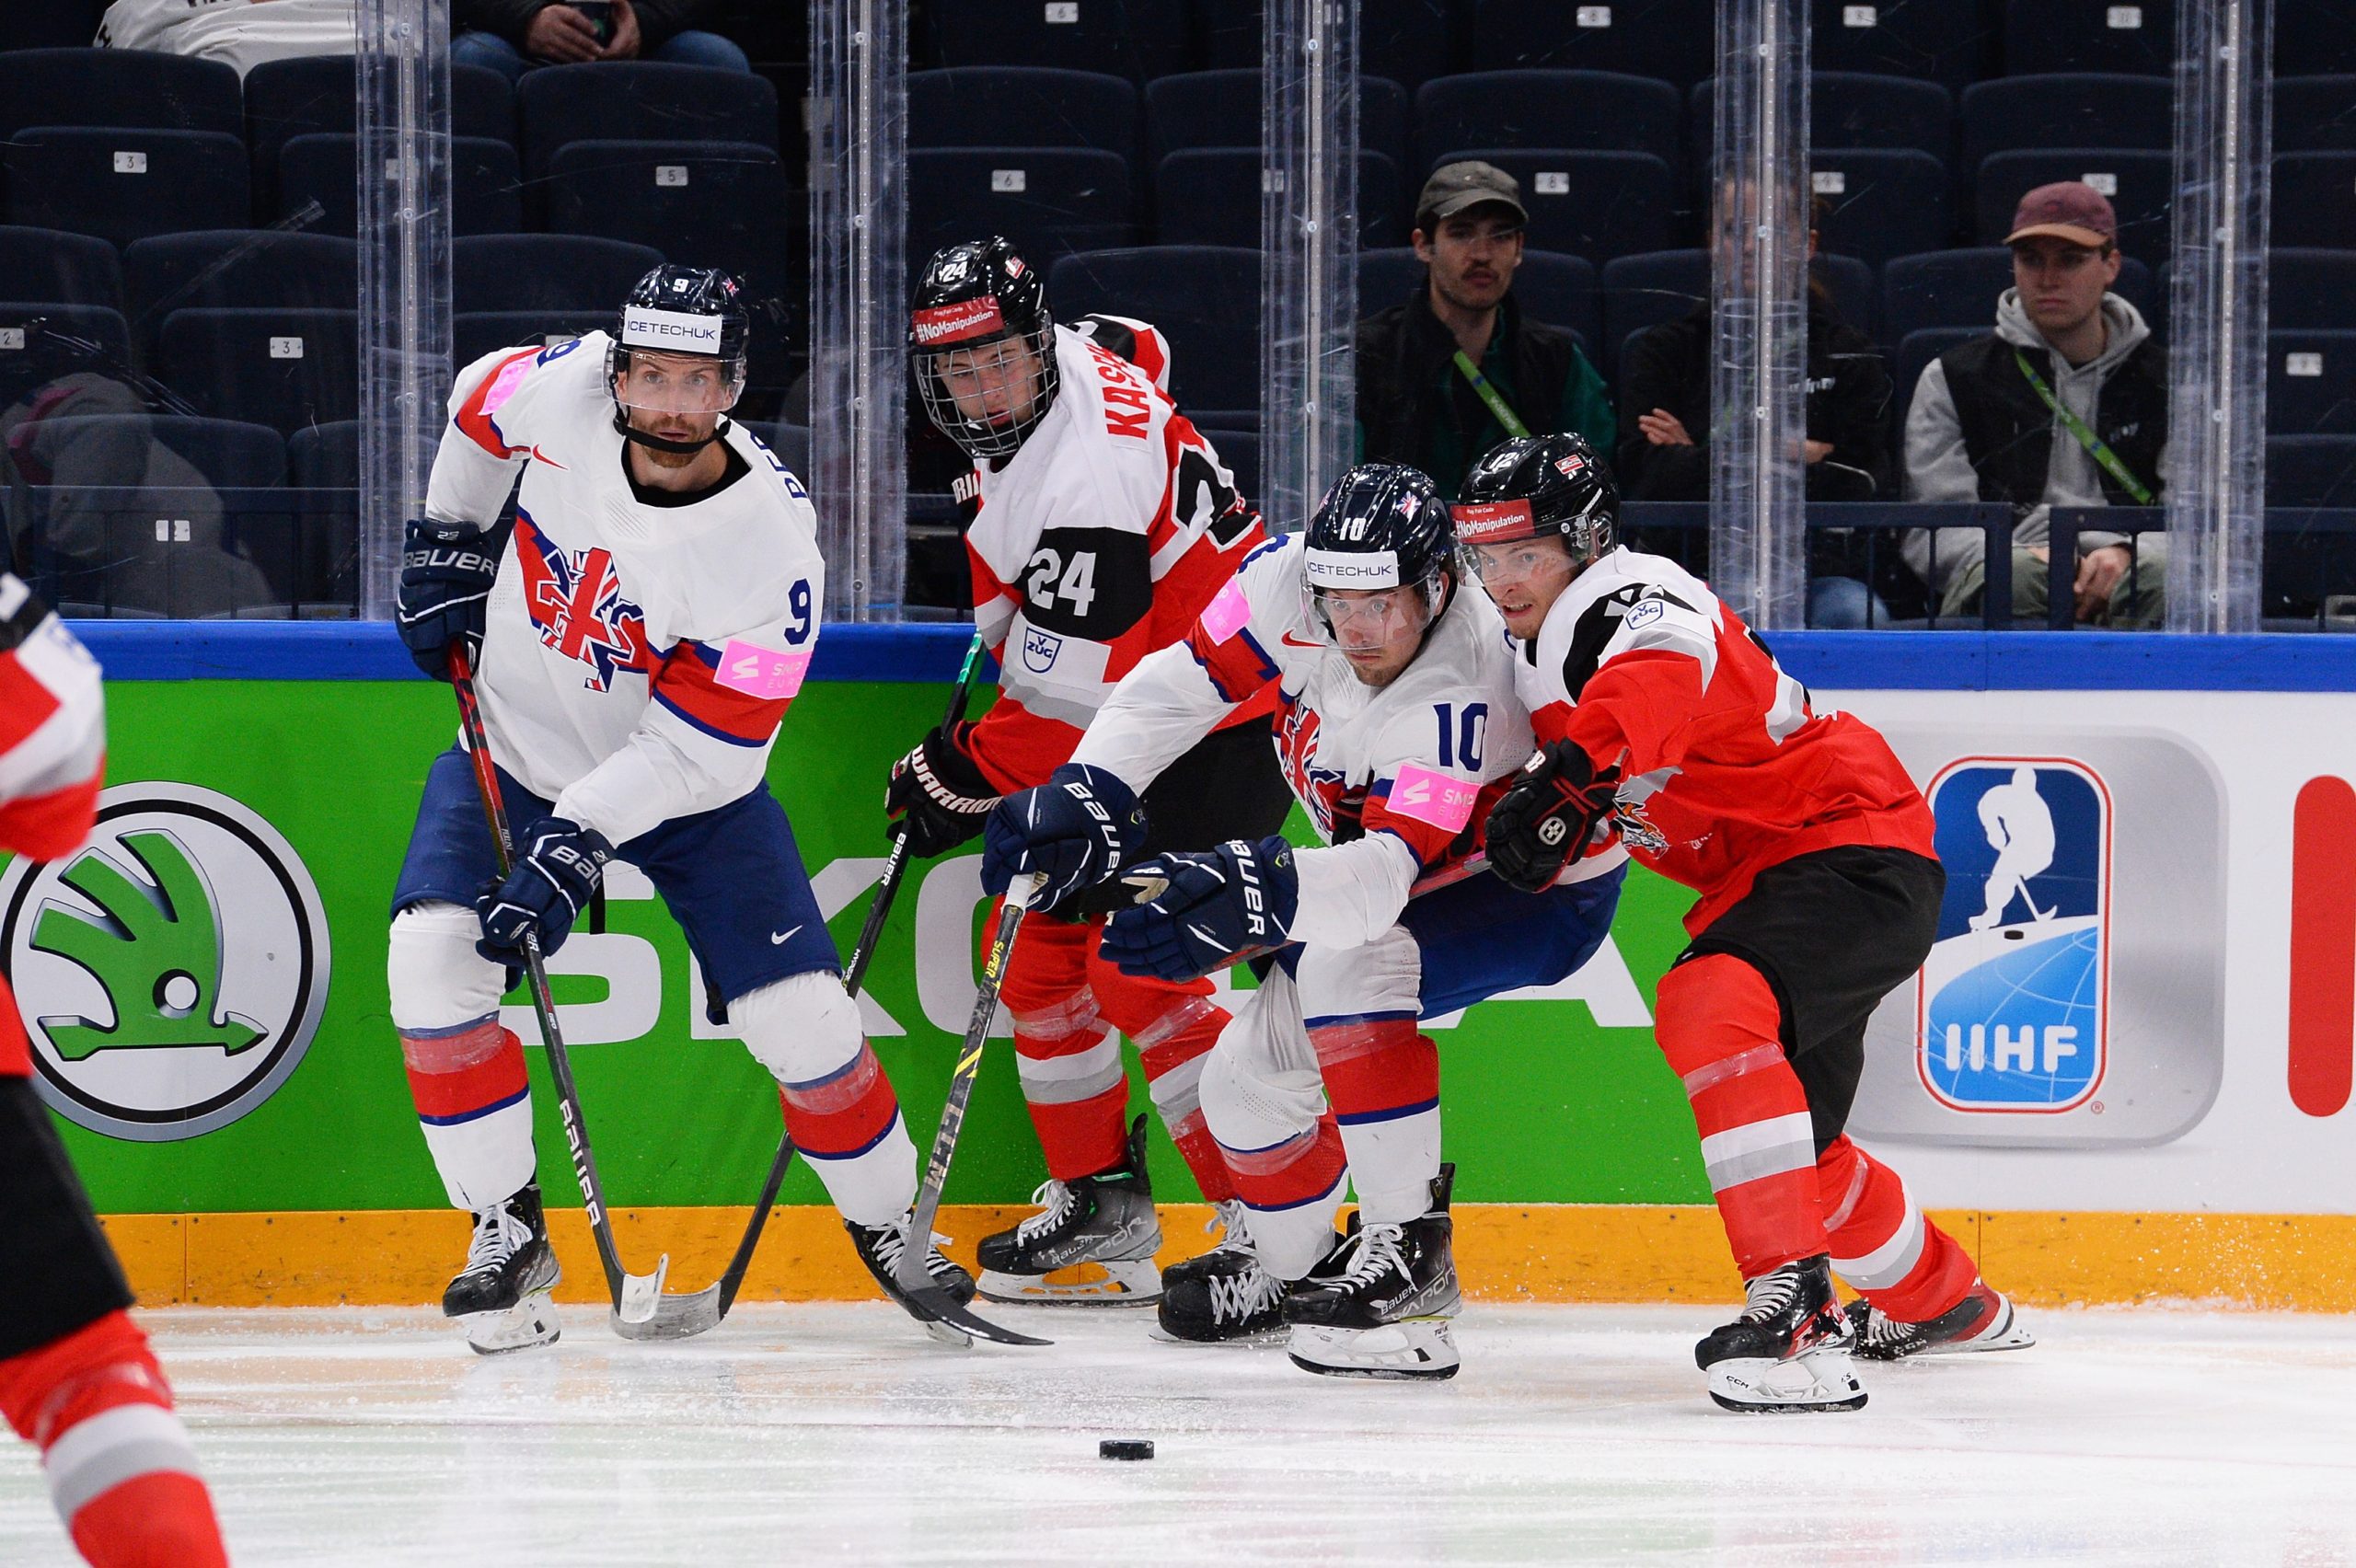 2022 NHL Entry Draft prospect Marco Kasper (centre) played a starring role for Austria at this year's World Championship (Image: Dean Woolley)